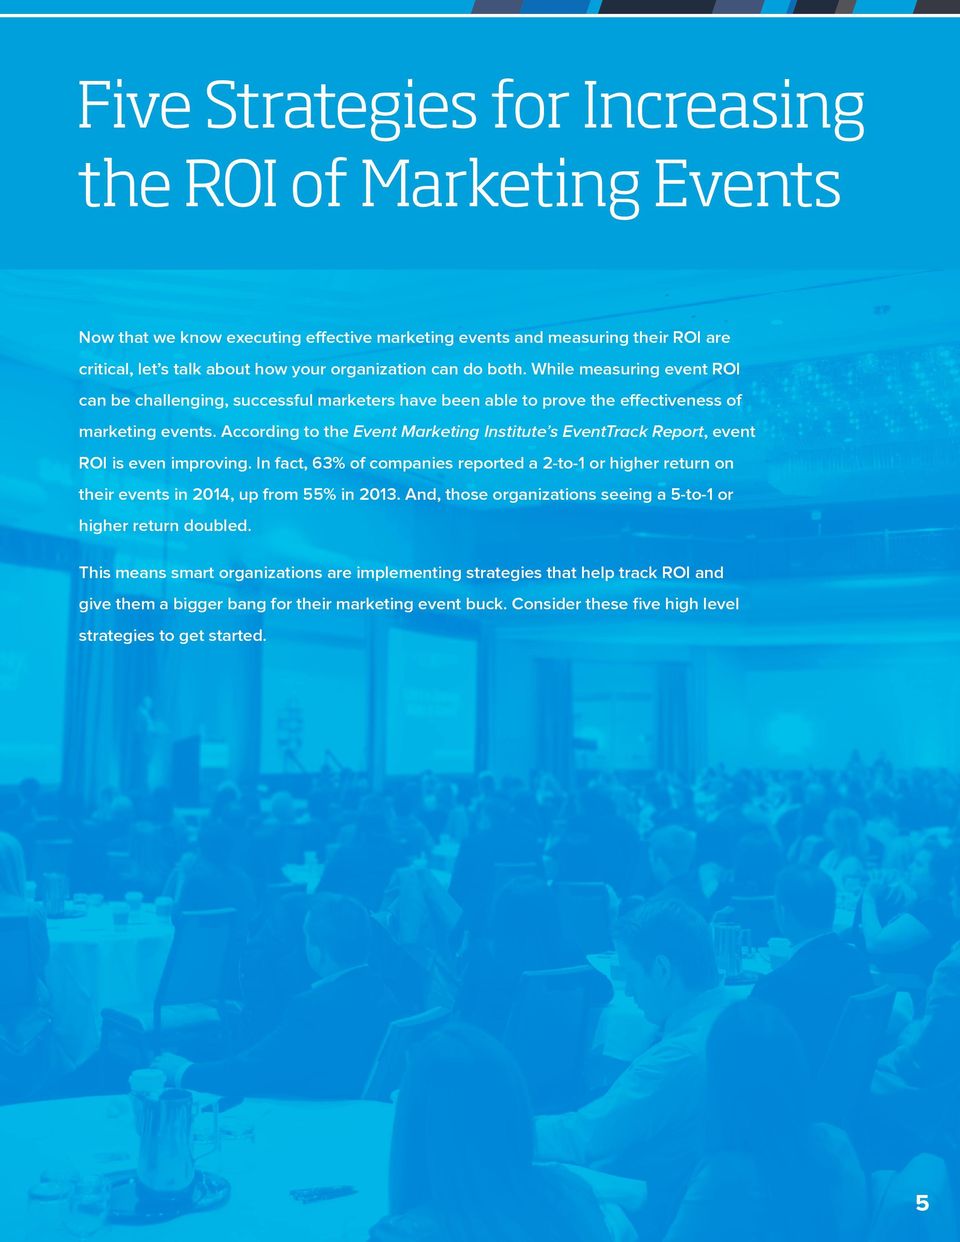 According to the Event Marketing Institute s EventTrack Report, event ROI is even improving. In fact, 63% of companies reported a 2-to-1 or higher return on their events in 2014, up from 55% in 2013.